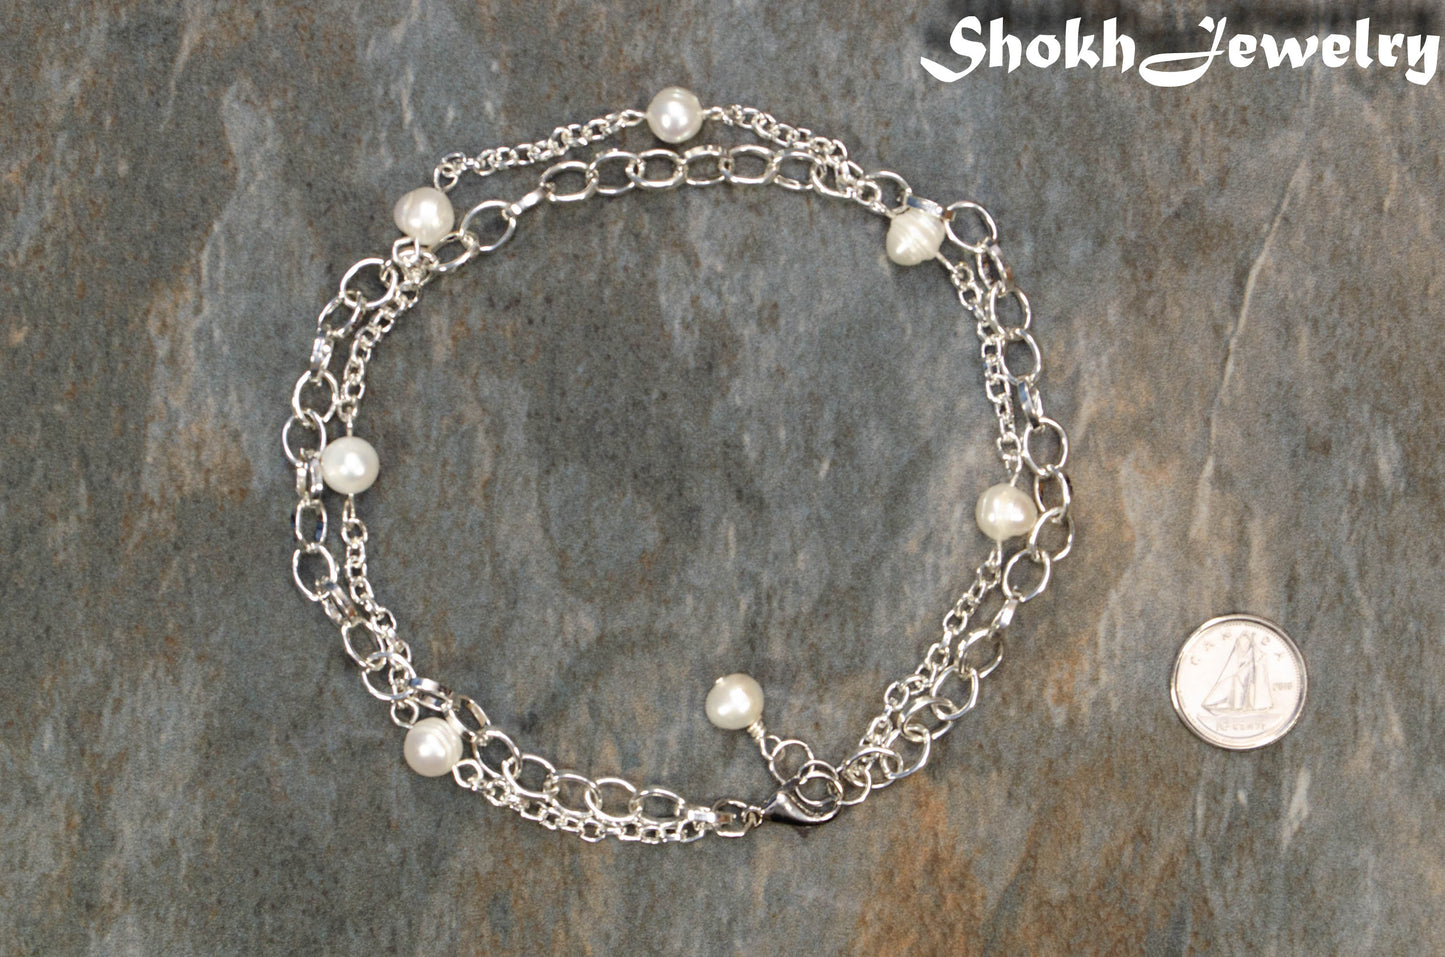 Double Layered Chain and Freshwater Pearl Anklet beside a dime.